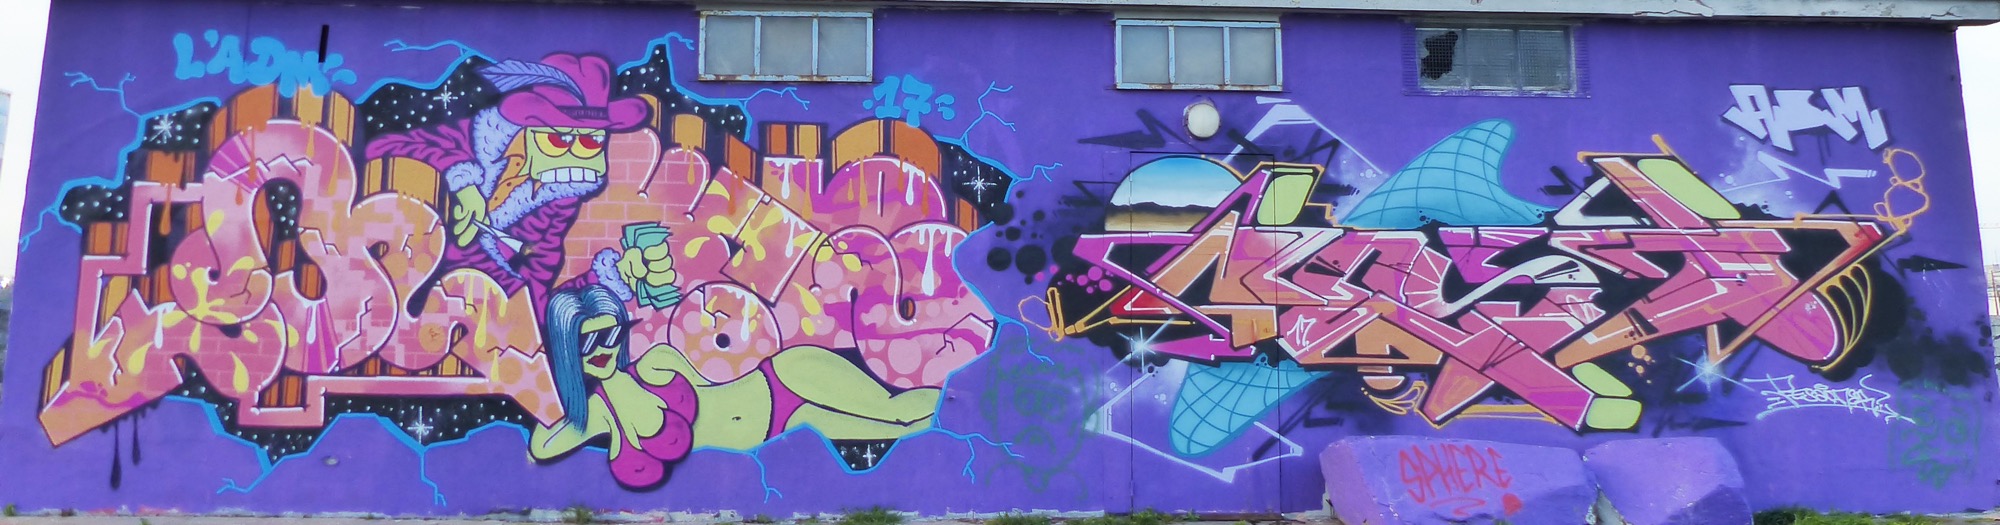 Graffiti 30  captured by Rabot in Nantes France